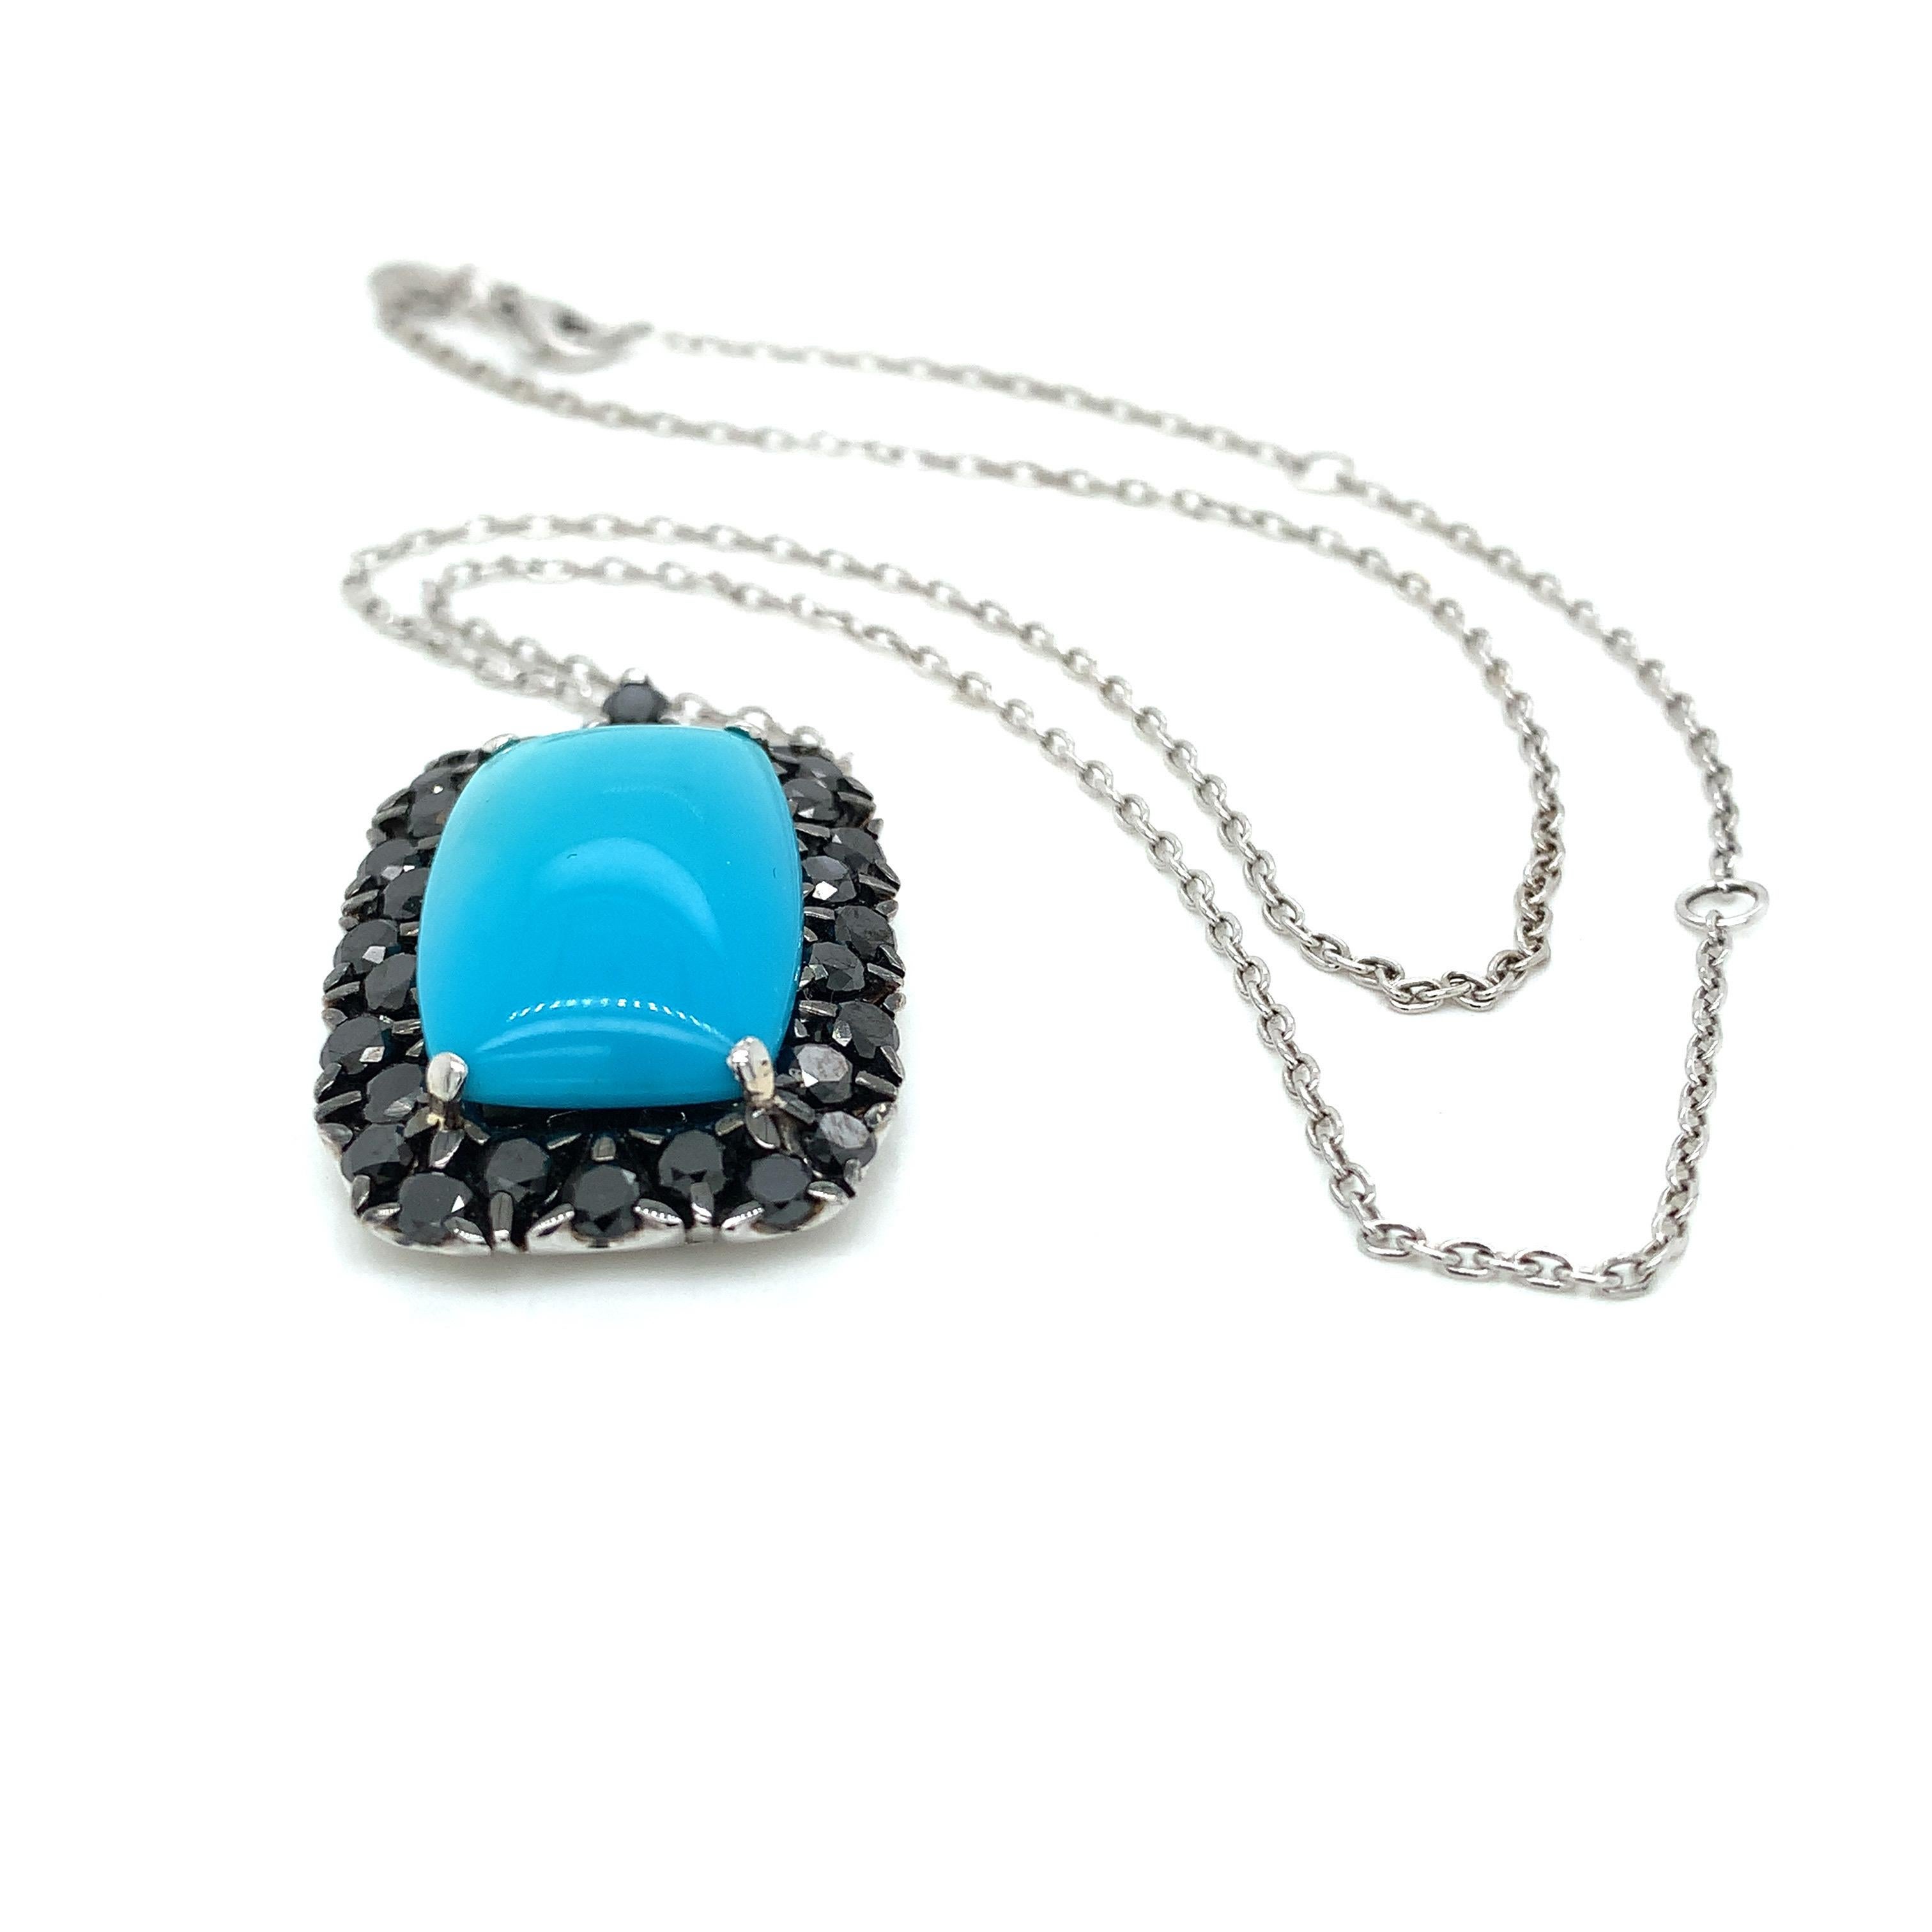 18KT White Gold GARAVELLI Pendant With Chain With BLACK DIAMONDS & TURQUOISE
The pendant measures MM 22X13
Tha chain measures cm 48 ( 19